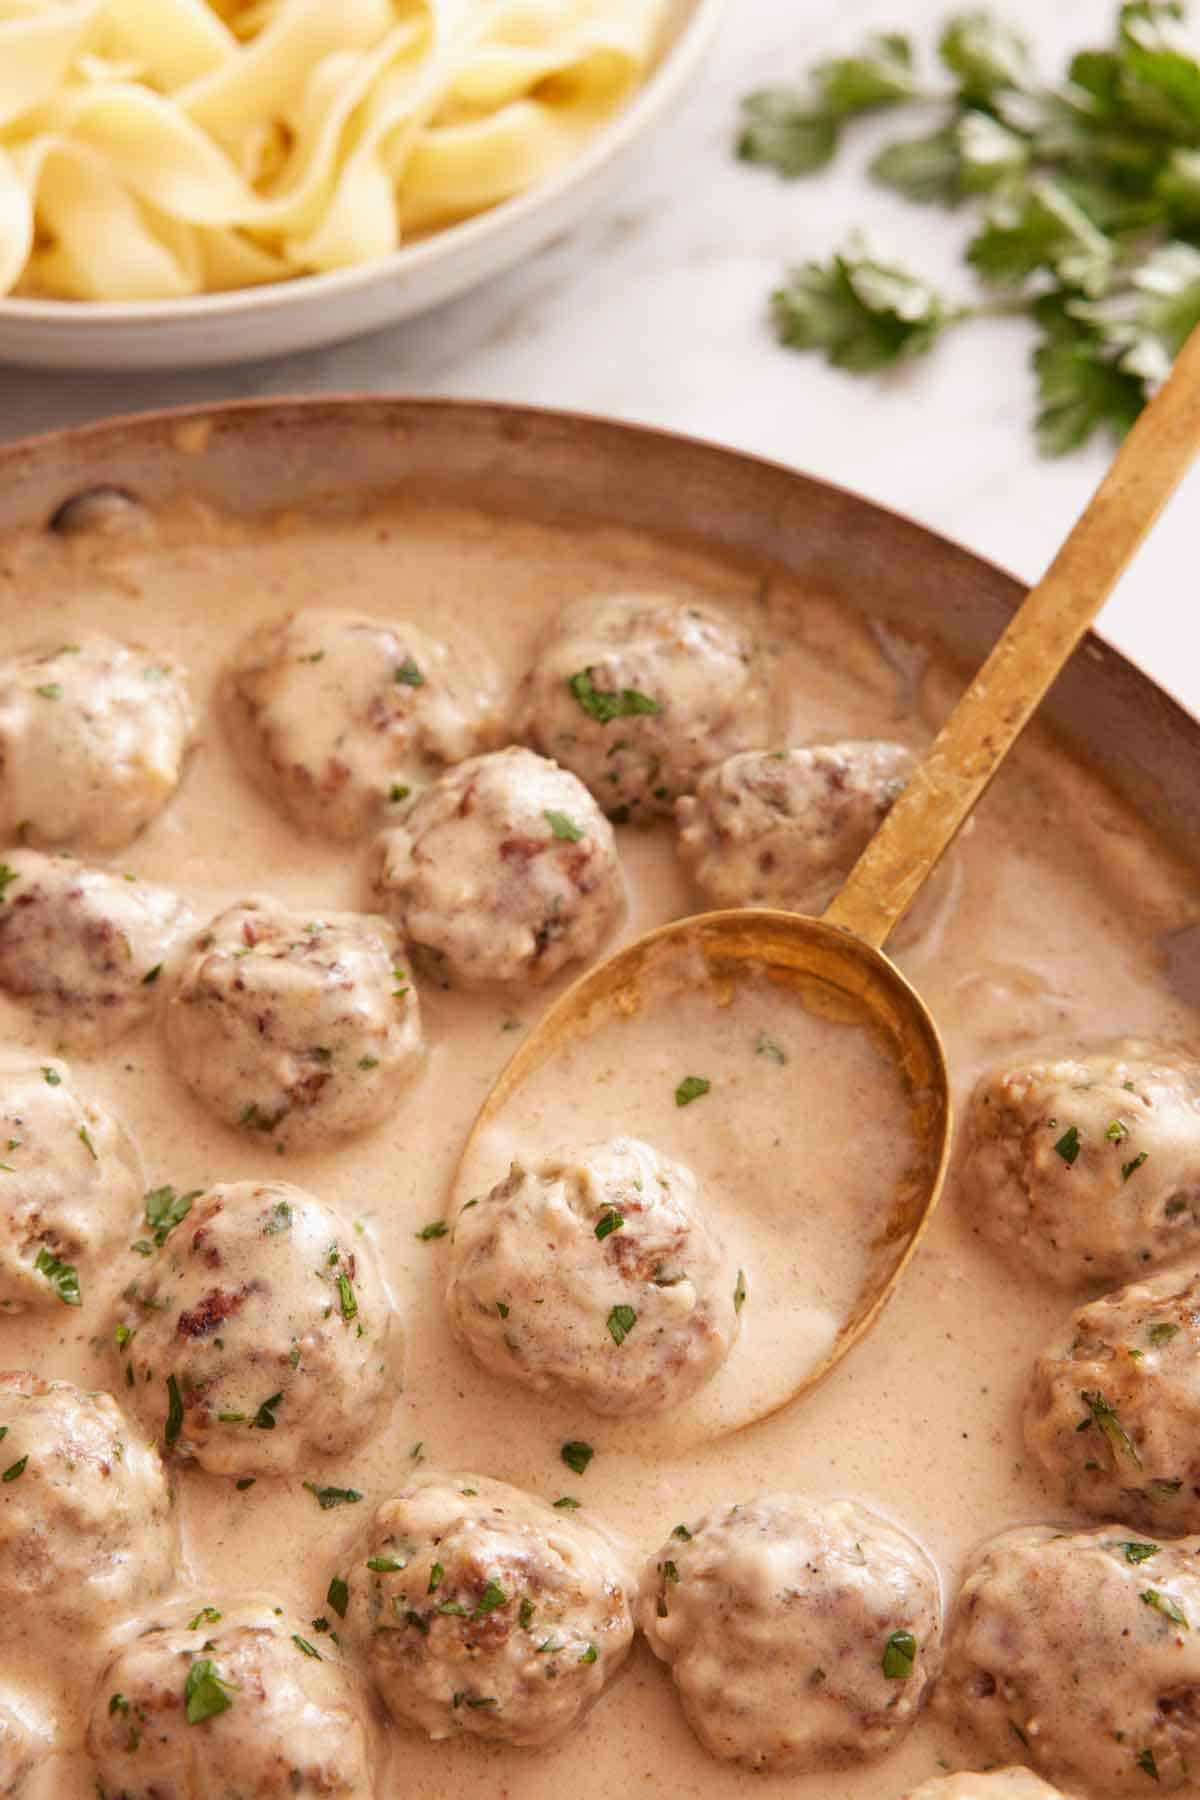 A skillet of Swedish meatballs with a serving spoon tucked underneath one meatball.